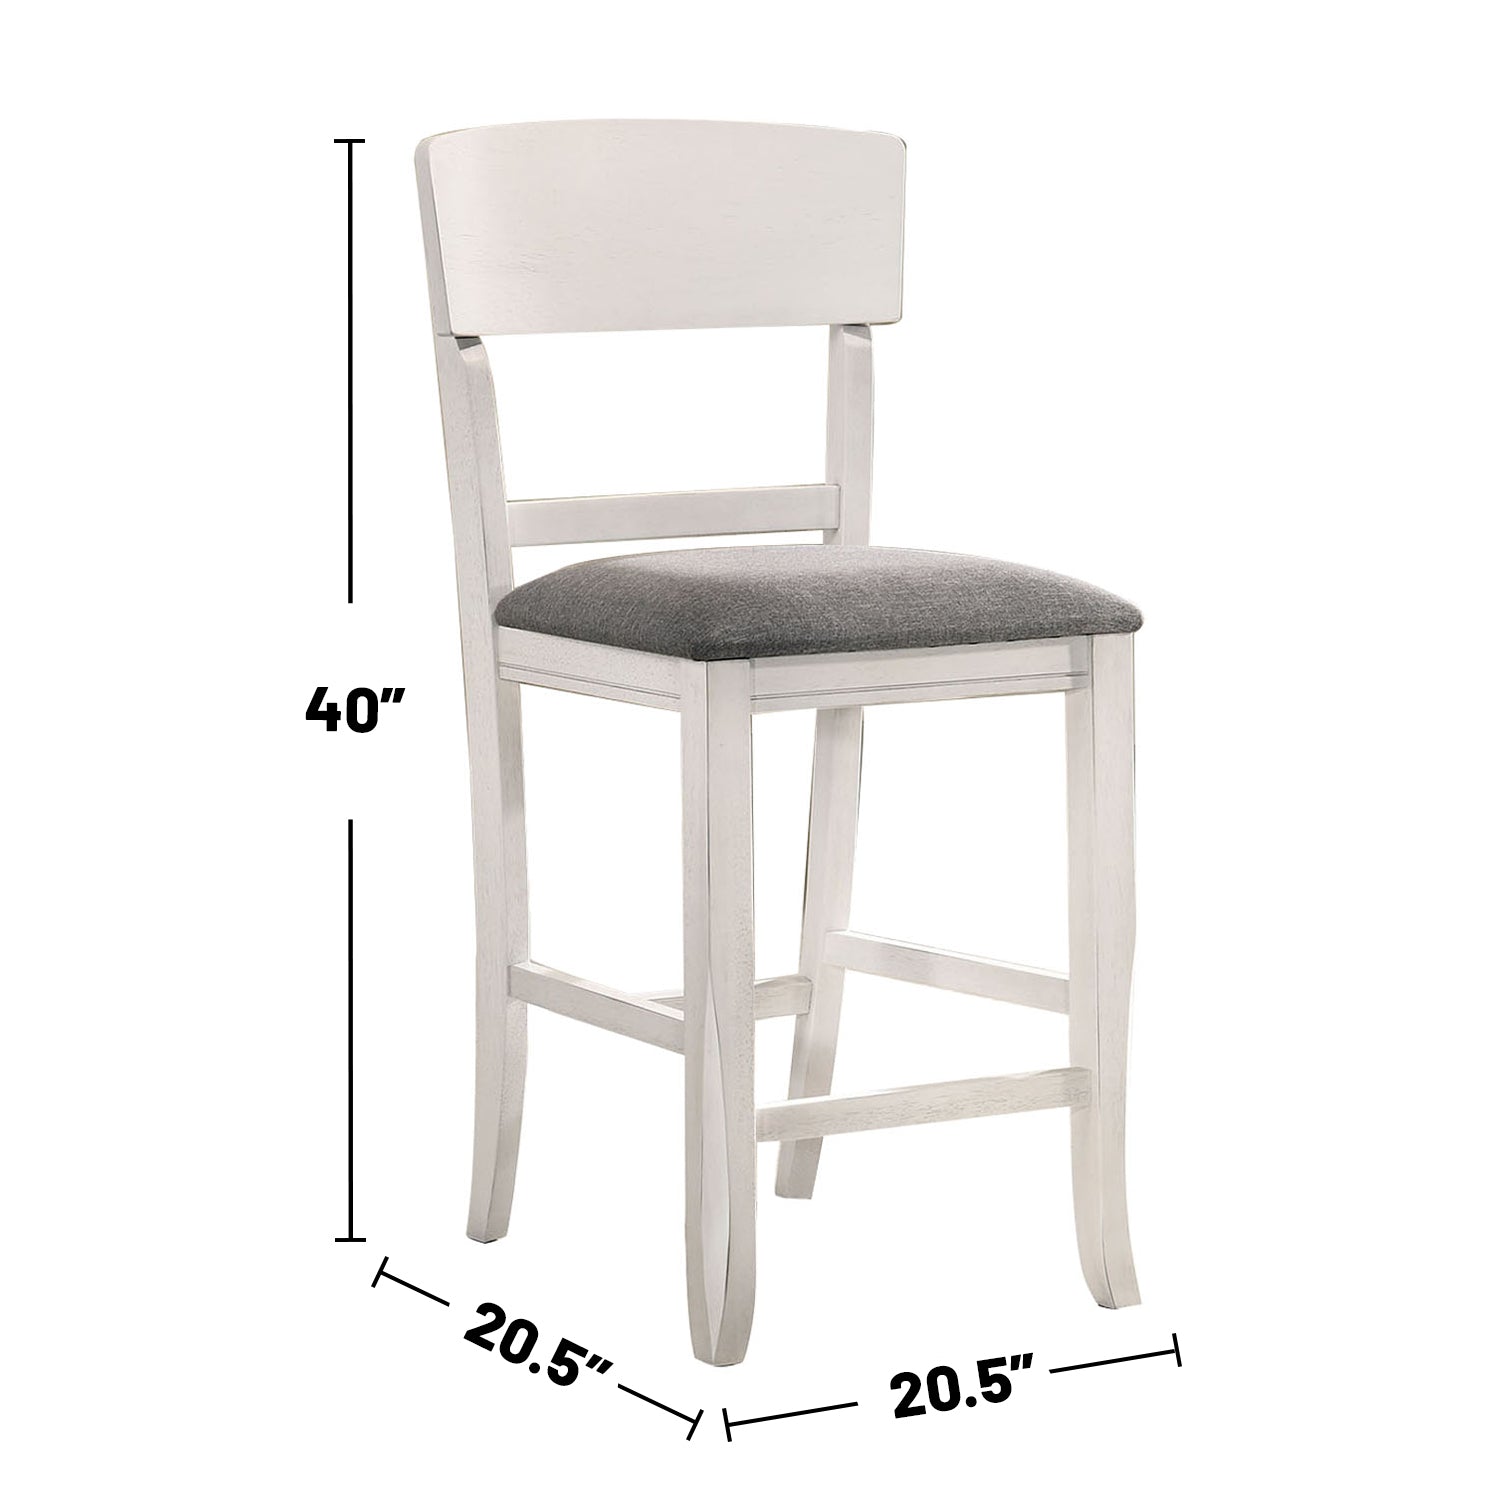 Set of 2 Fabric Padded Counter Height Chairs in White solid-white-dining room-dining chairs-wood+fabric